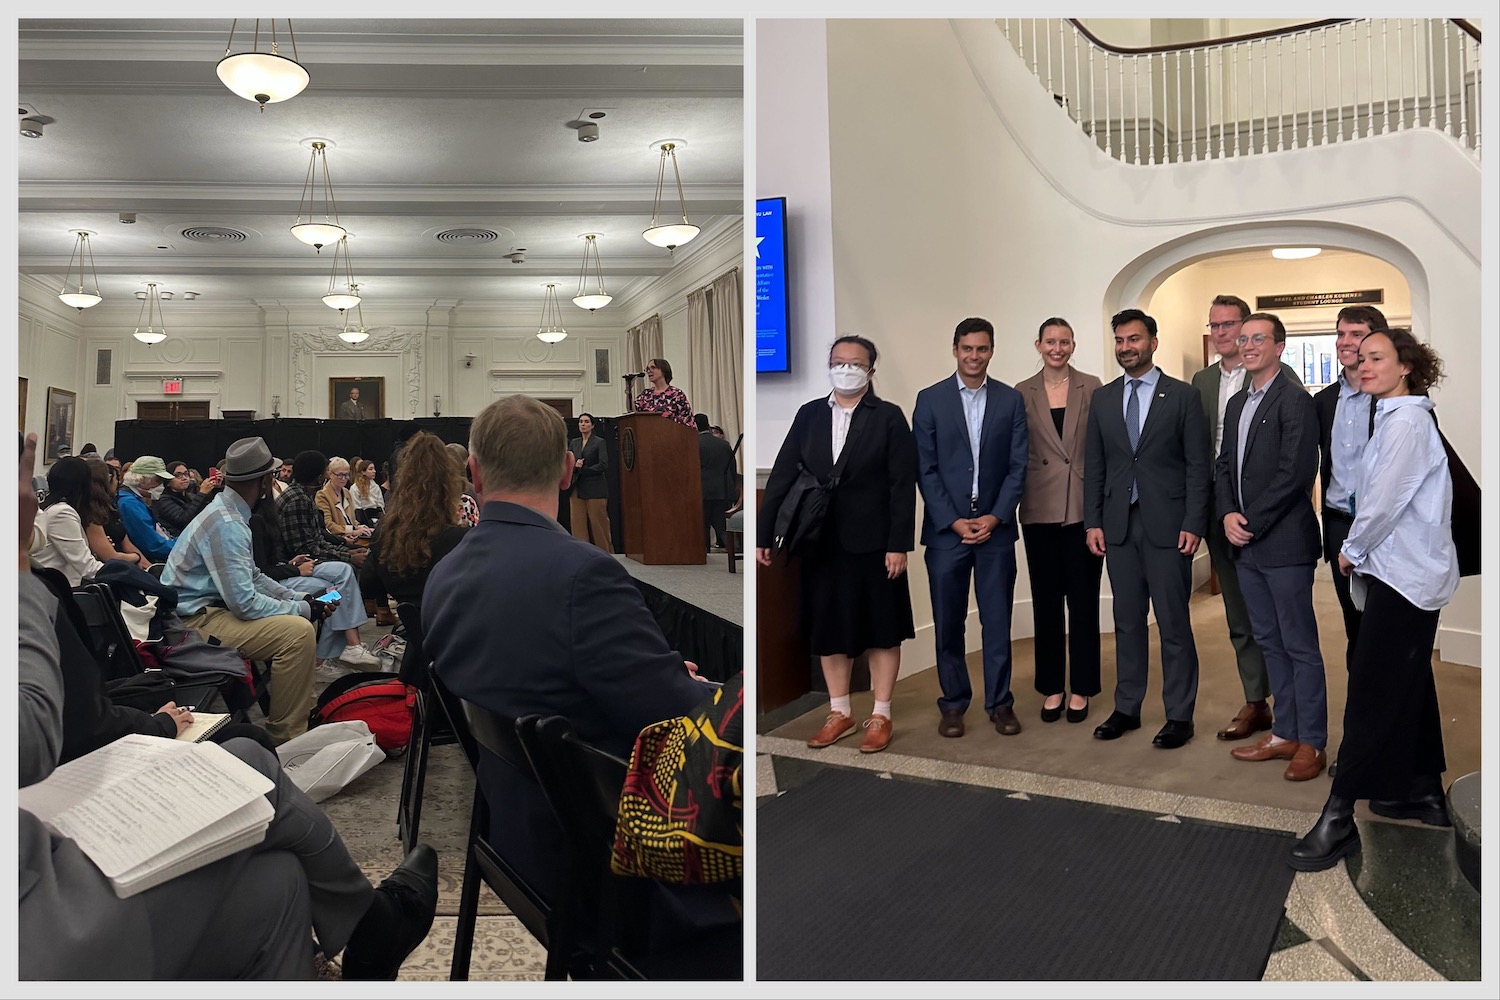 A collage of two photos. From left to right: an audience listening to a speaker on a podium in a classroom; a group of N.Y.U. law school students posing for a photo in formal attire